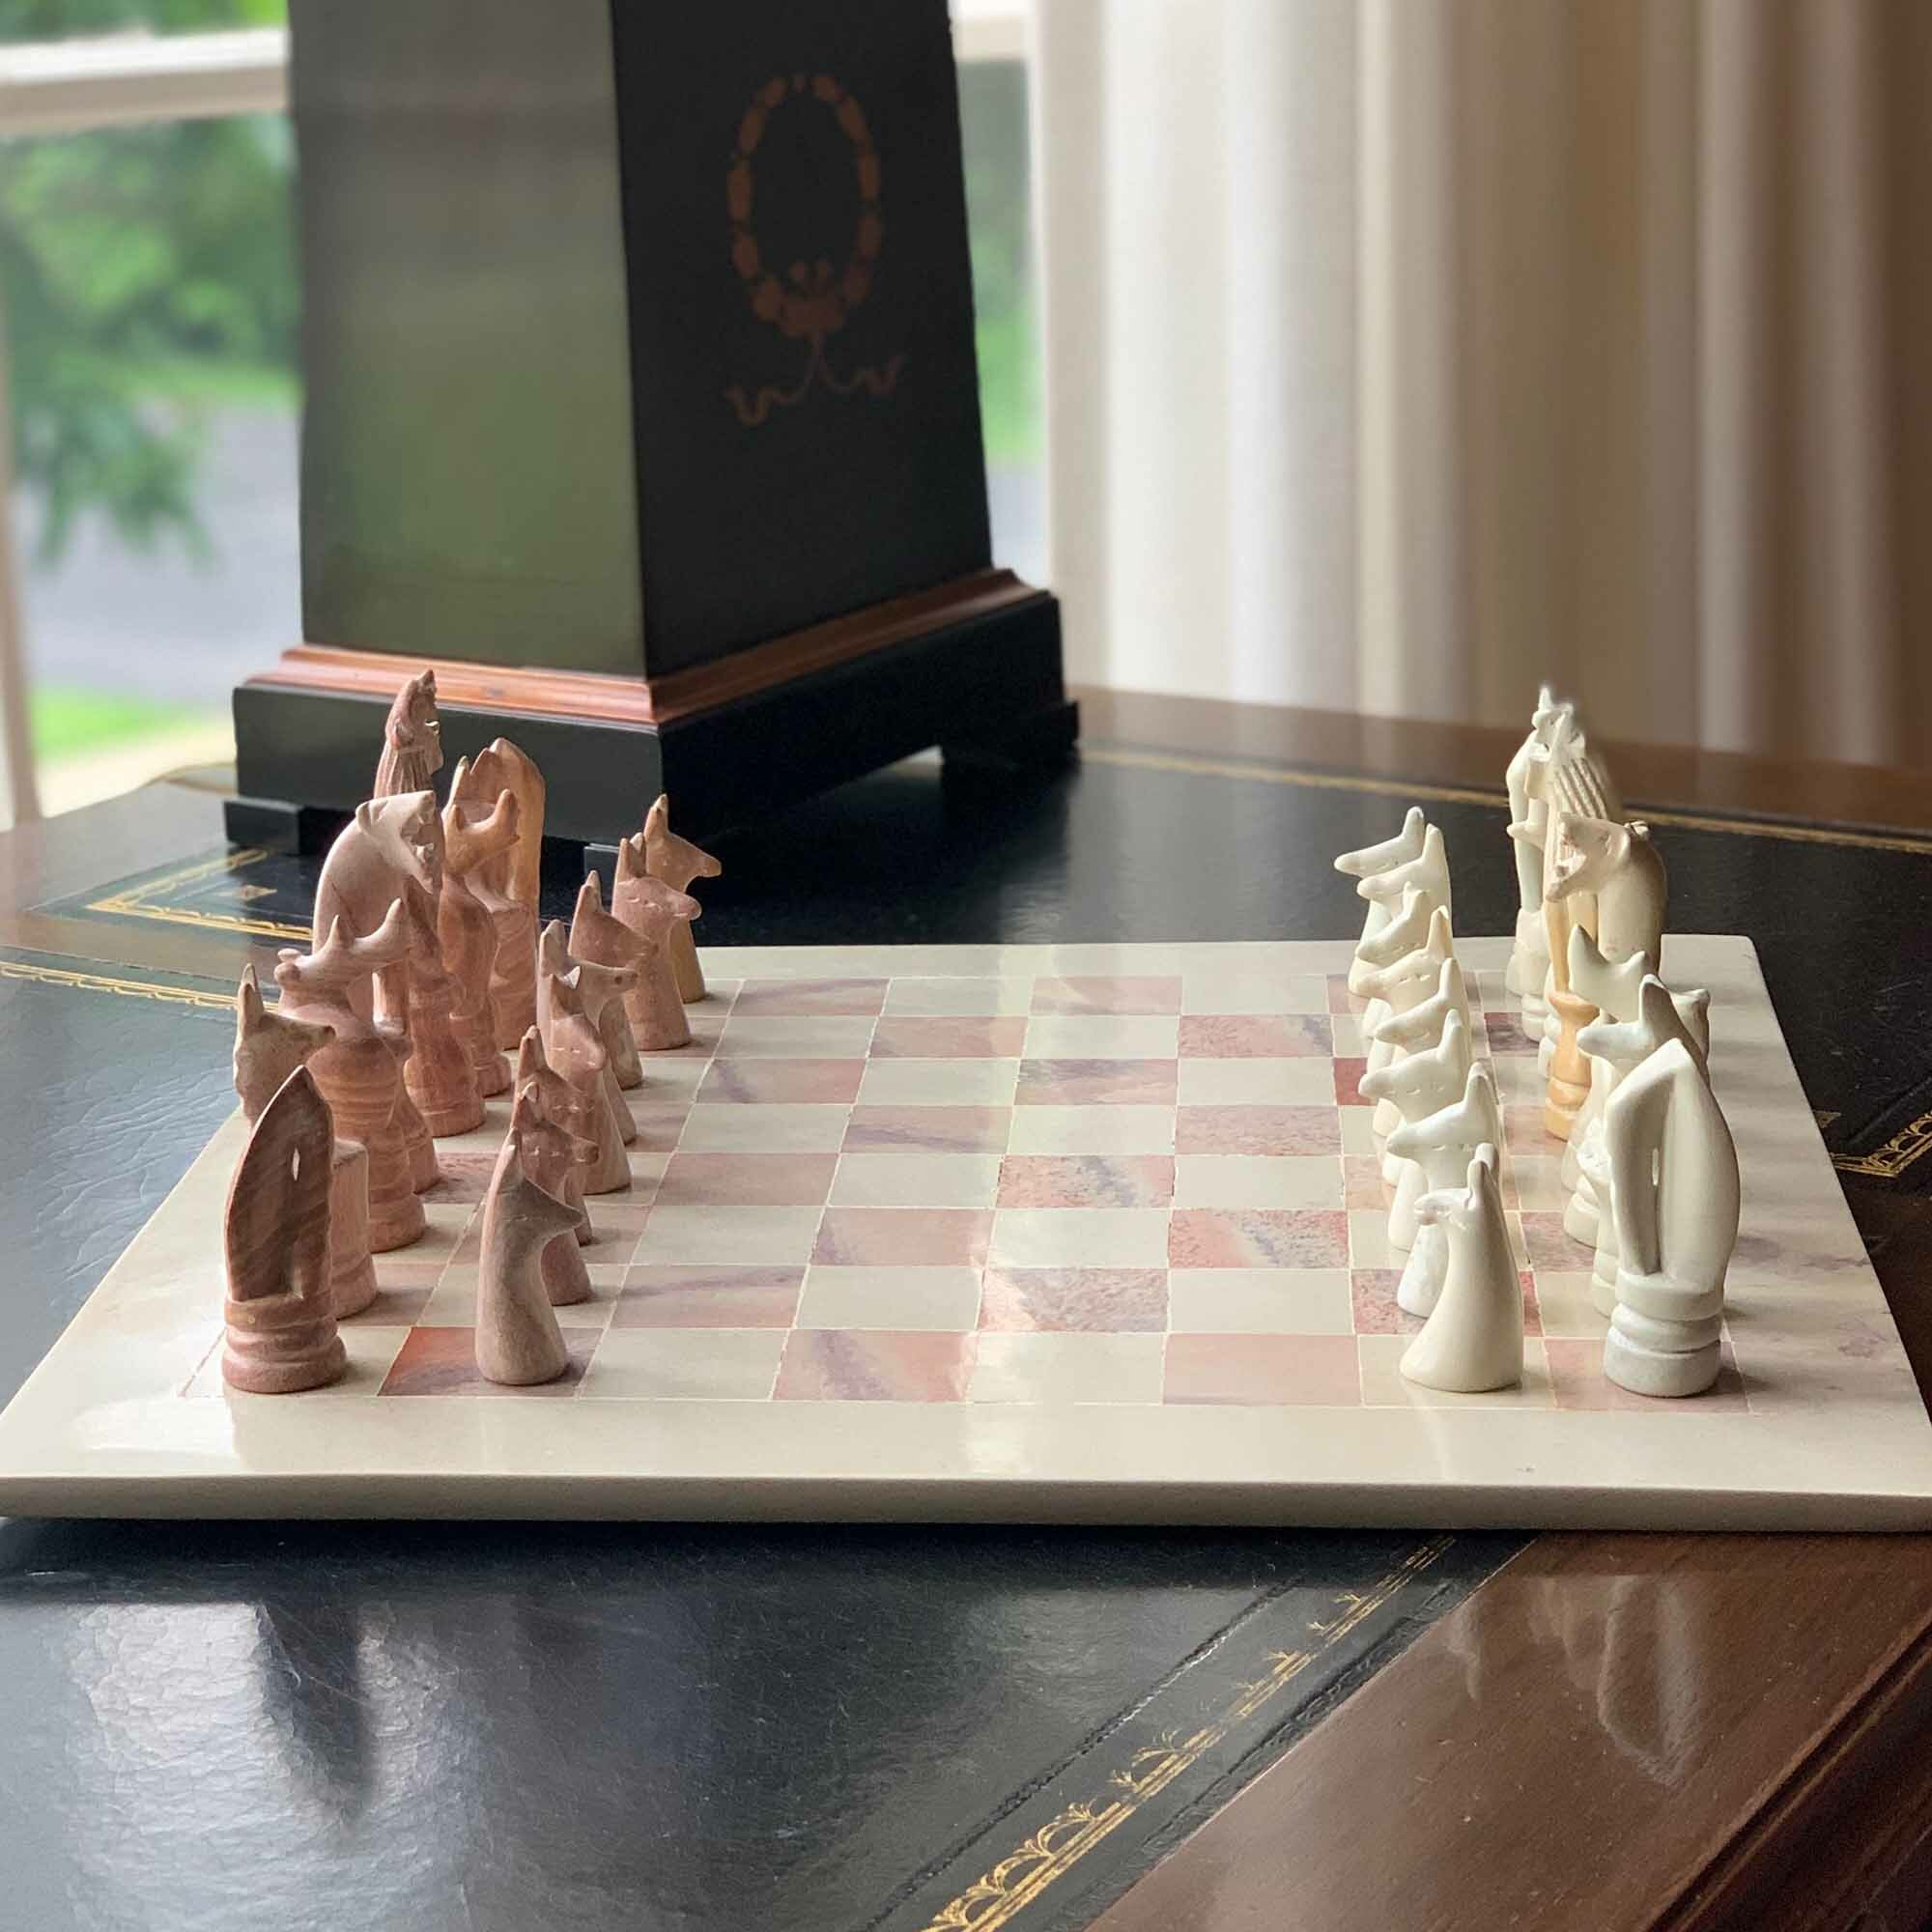 Chess Set With Marble Patterned Wooden Box, Metal For Dad, Gift